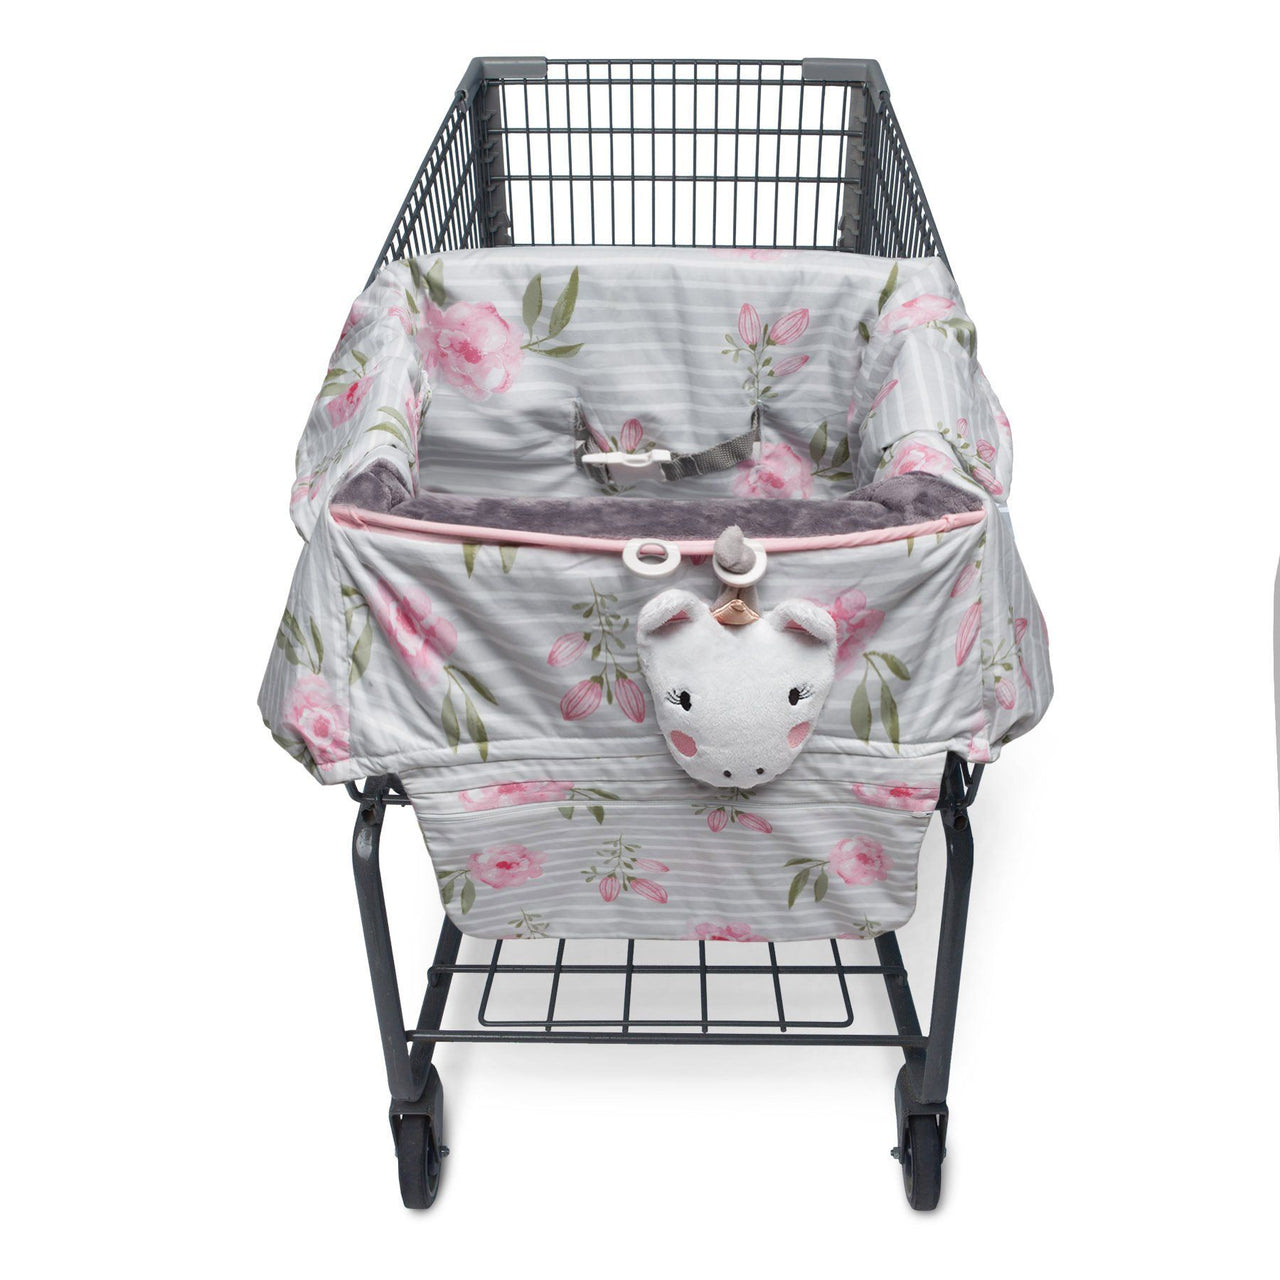 Boppy Prefered Shopping Cart and High Chair Cover